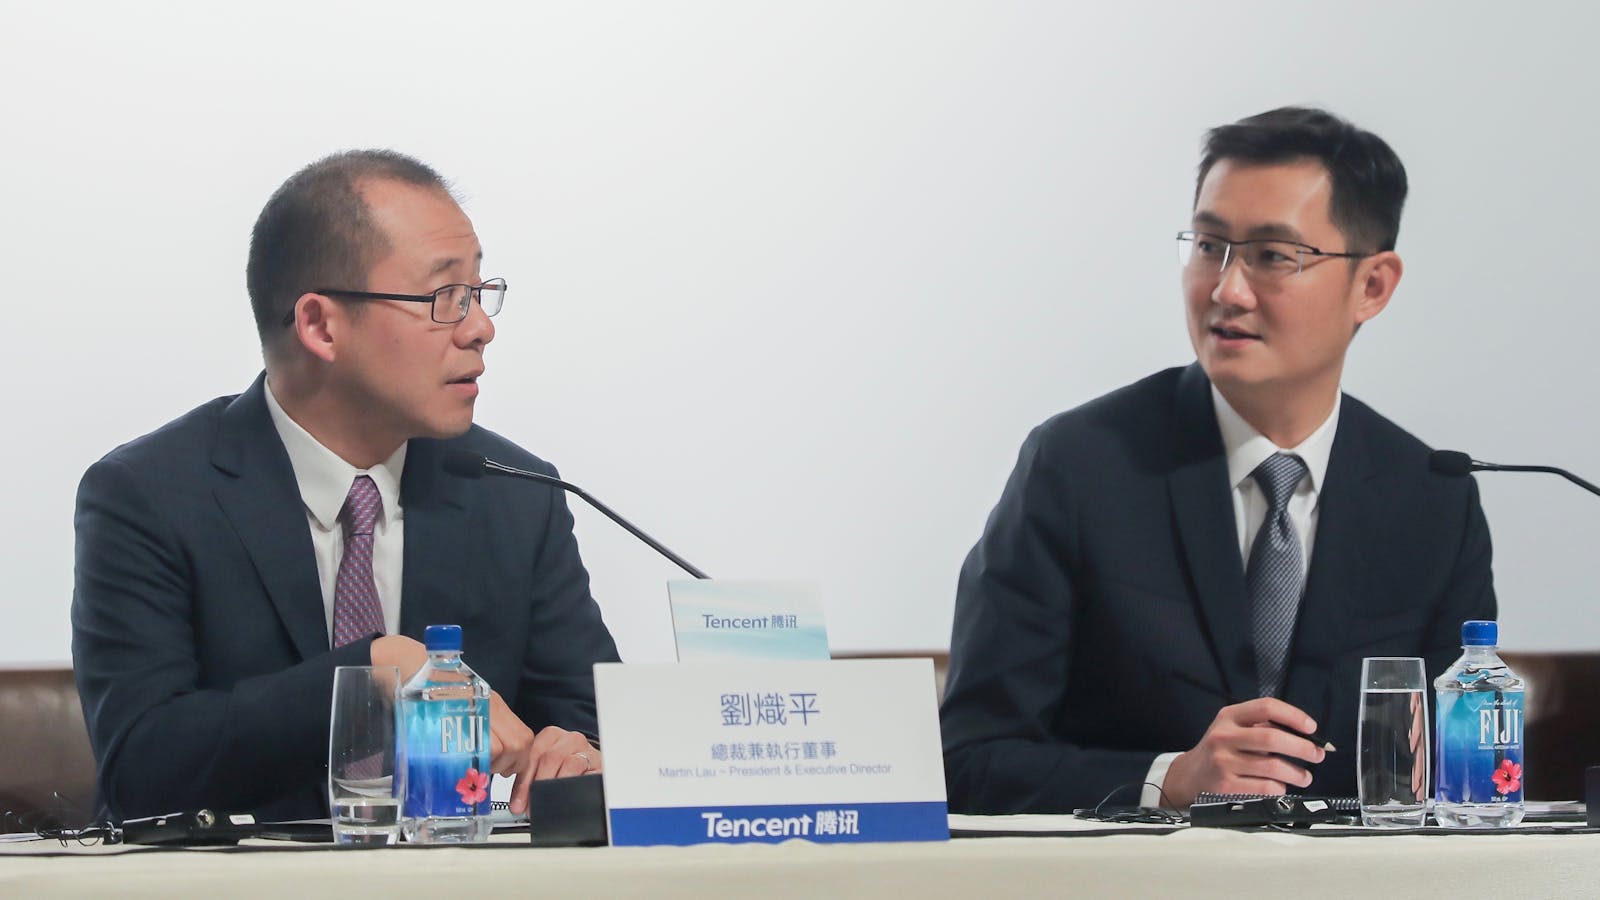 Tencent president Martin Lau and CEO Ma Huateng. Photo by Bloomberg.